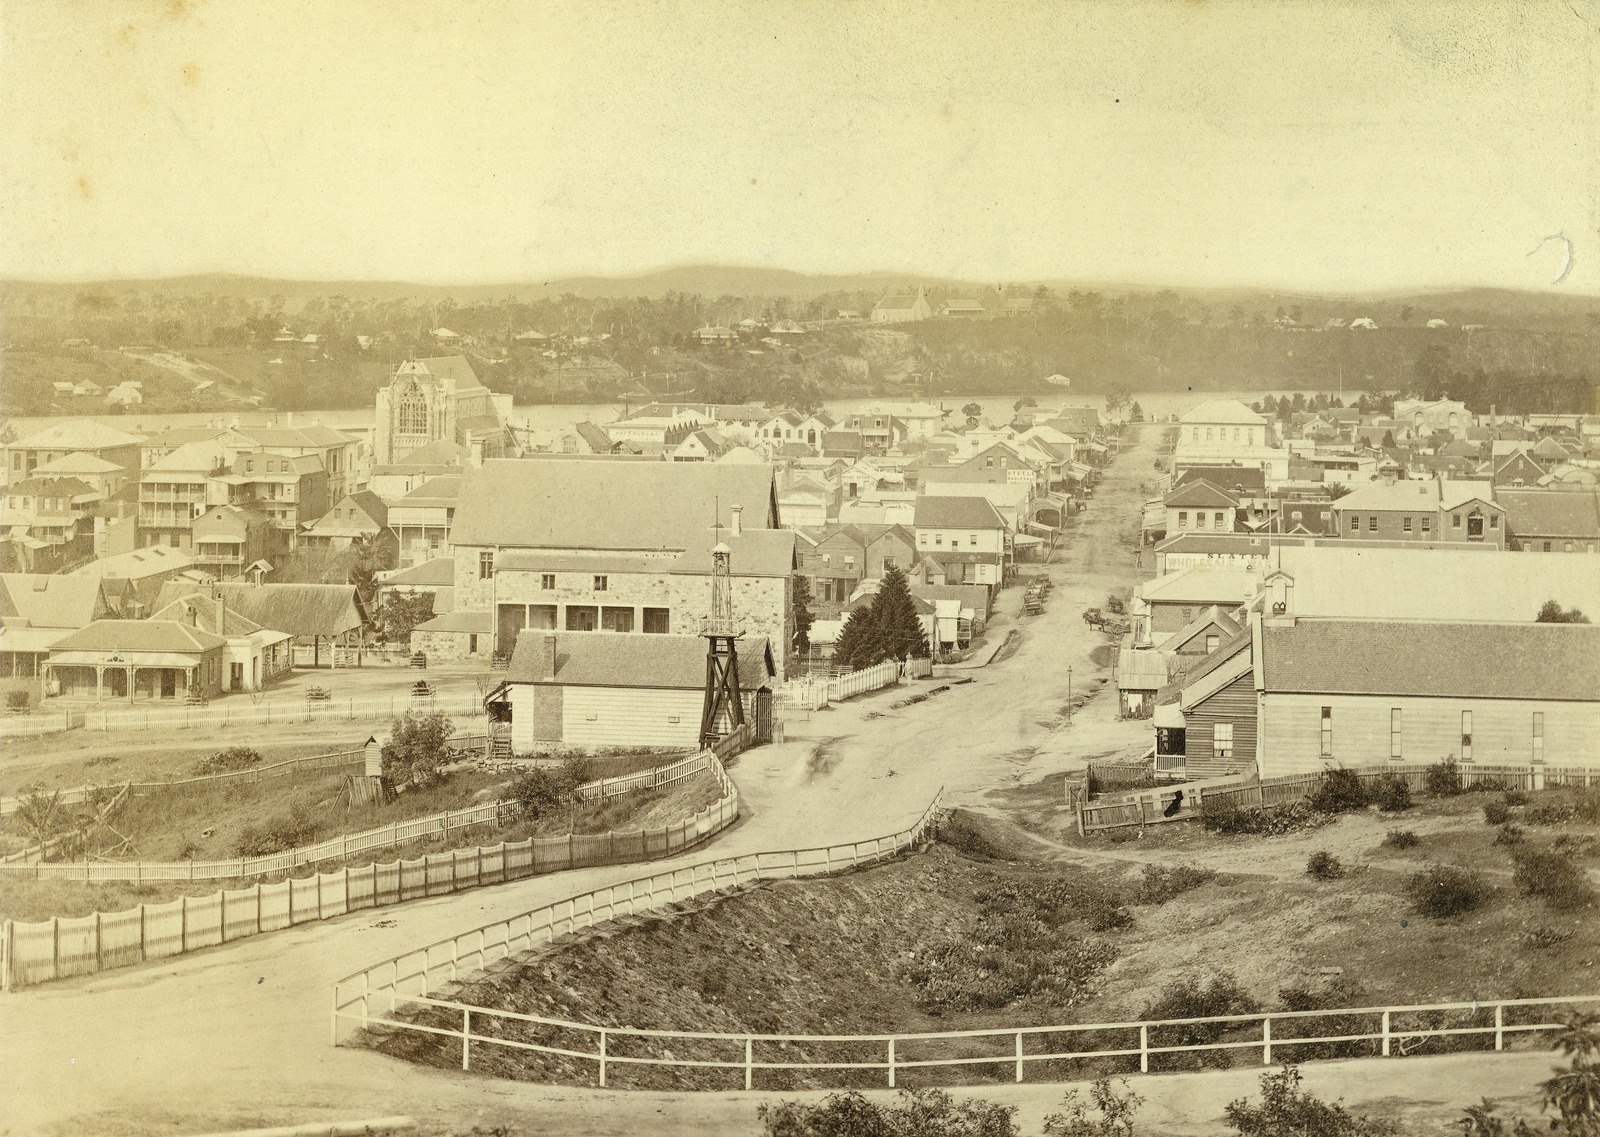 View of Edward Street looking towards the Brisbane River, 1877